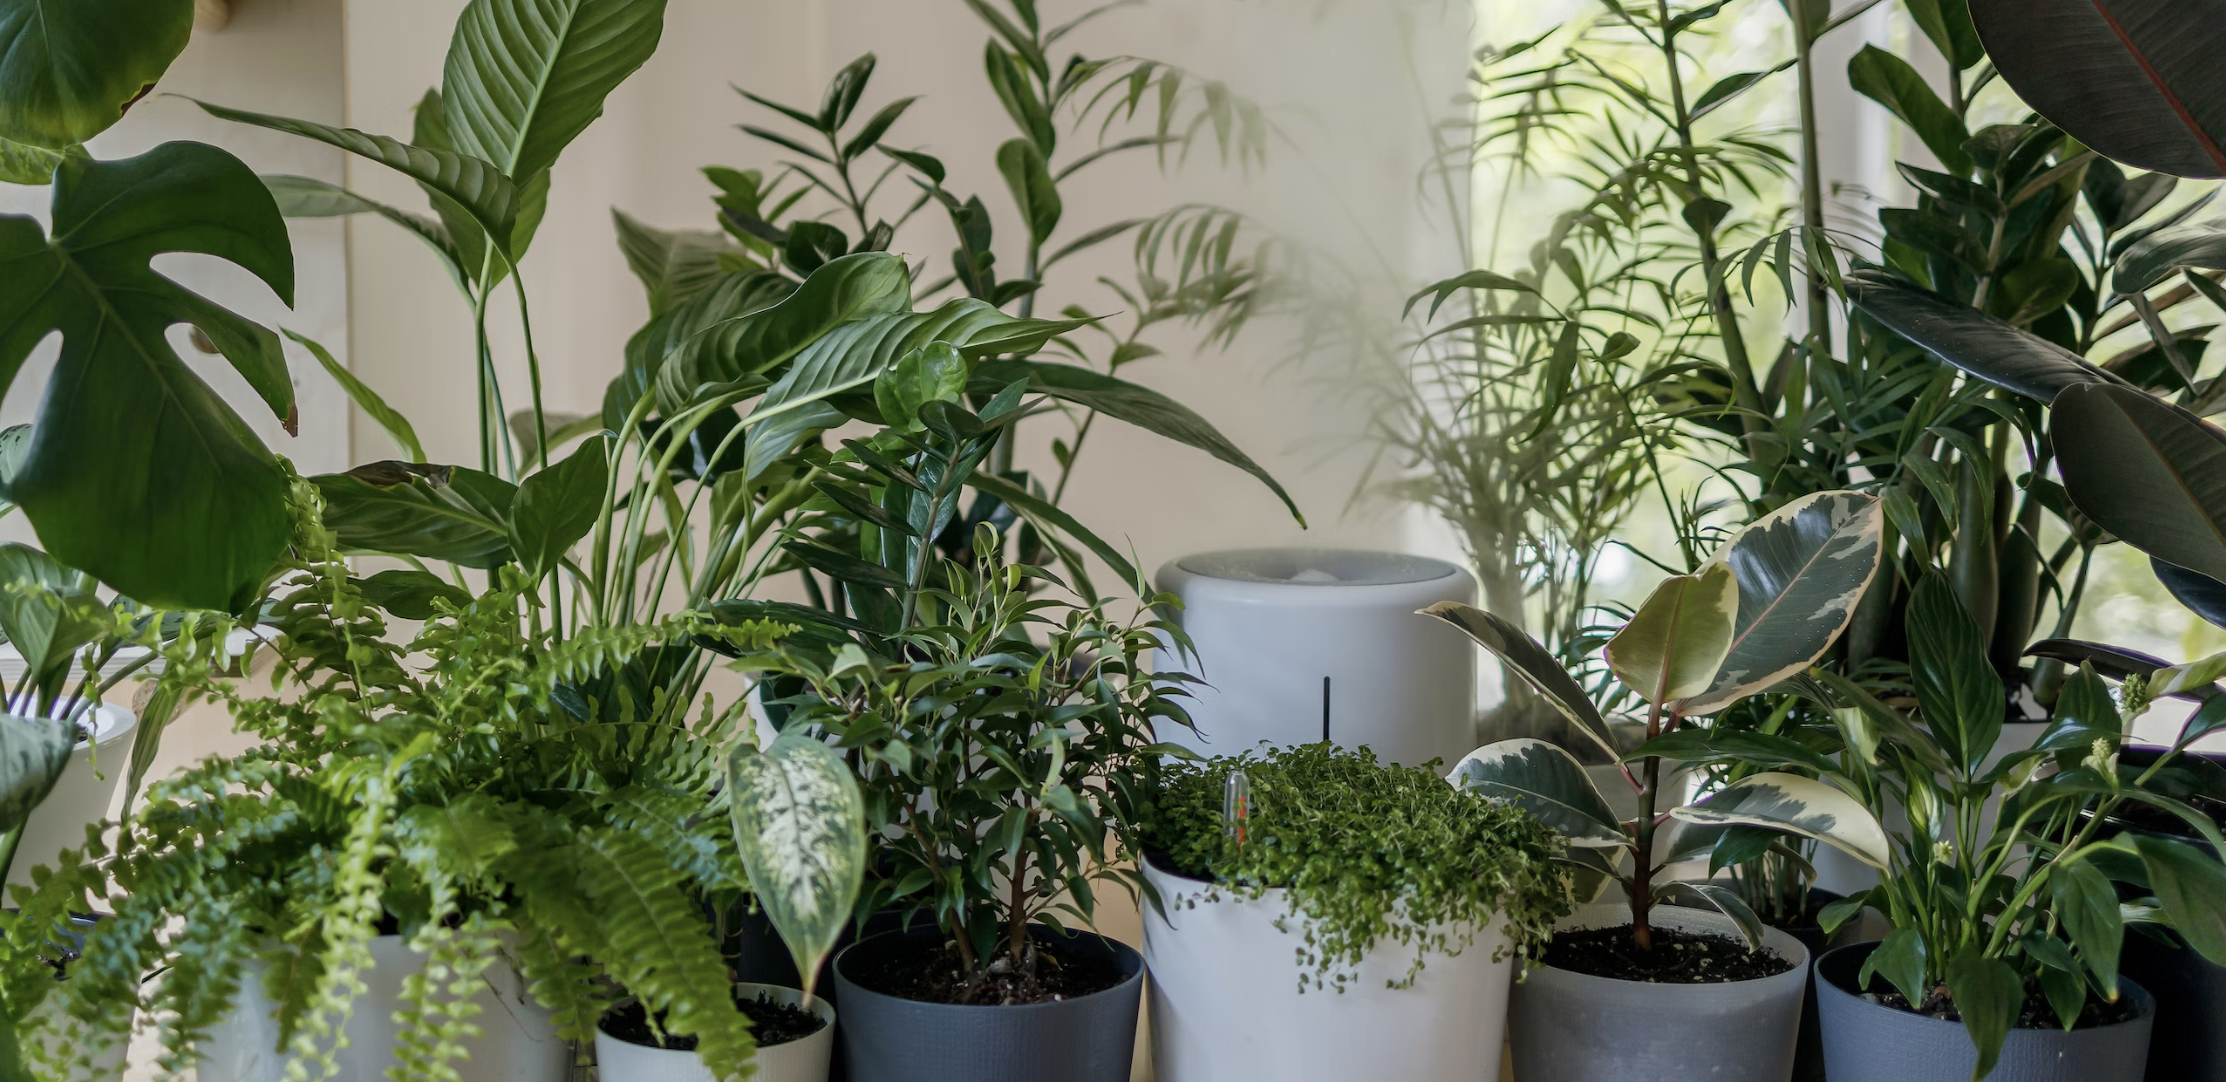 How to Choose the Perfect Plant Pot for Your Home or Garden